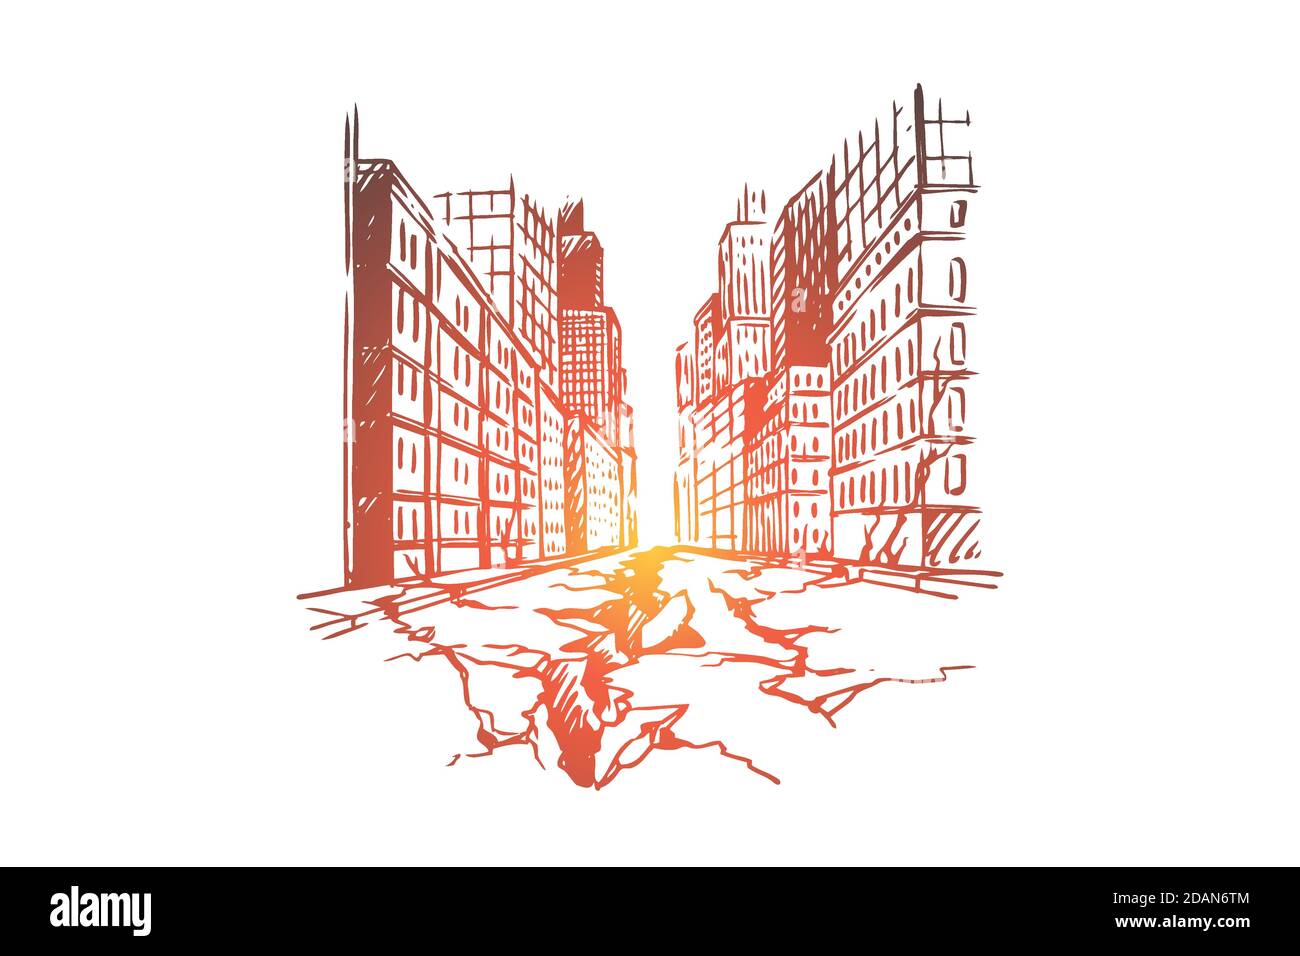 Earthquake, city, disaster, damage, danger concept. Hand drawn isolated vector. Stock Vector